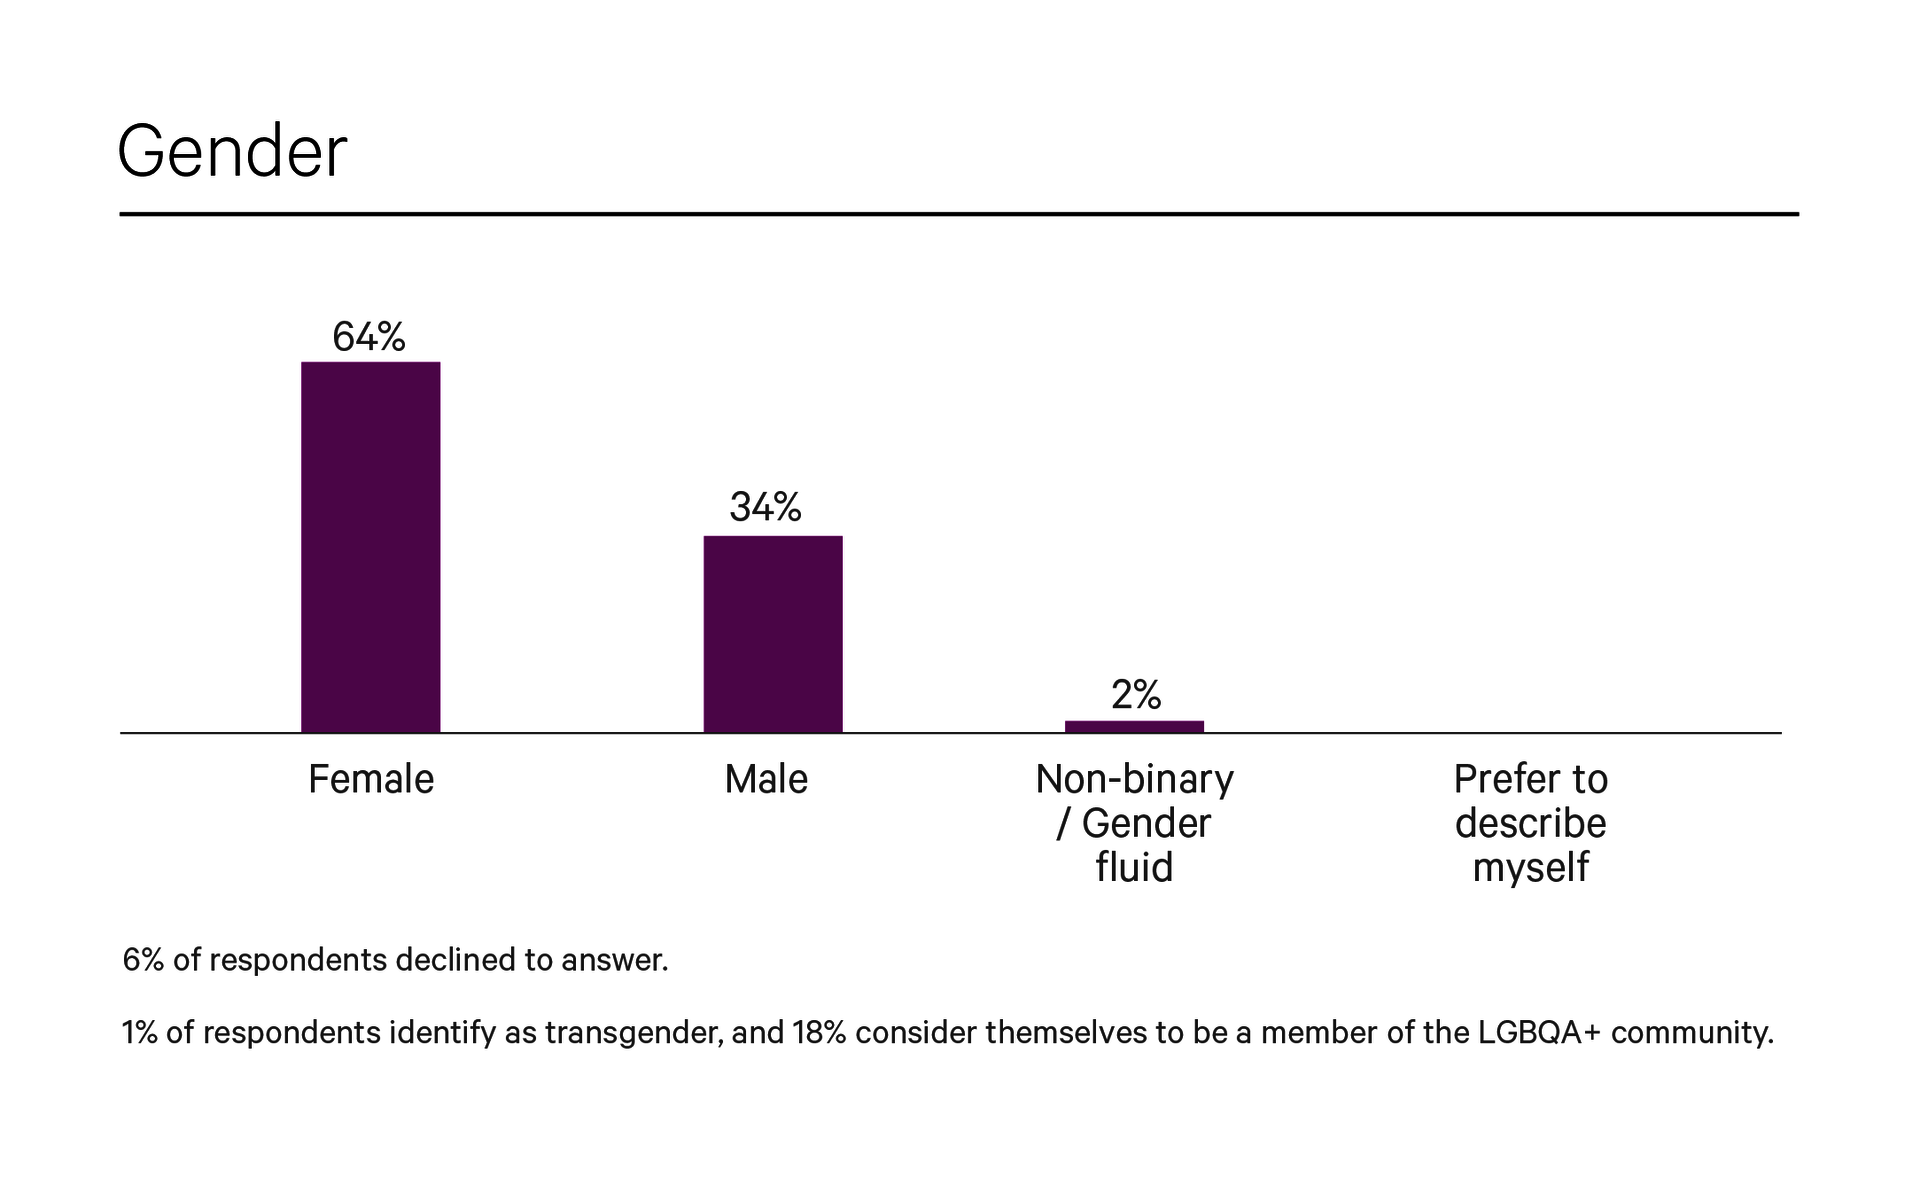 A bar graph titled “Gender”. 64% of respondents are female, 34% are male, 2% are non-binary or gender fluid and 0% responded “prefer to describe myself”. Below the graph reads “6 percent of respondents declined to answer. 1 percent of respondents identify as transgender, and 18 percent consider themselves to be a member of the LGBQA+ community”. 